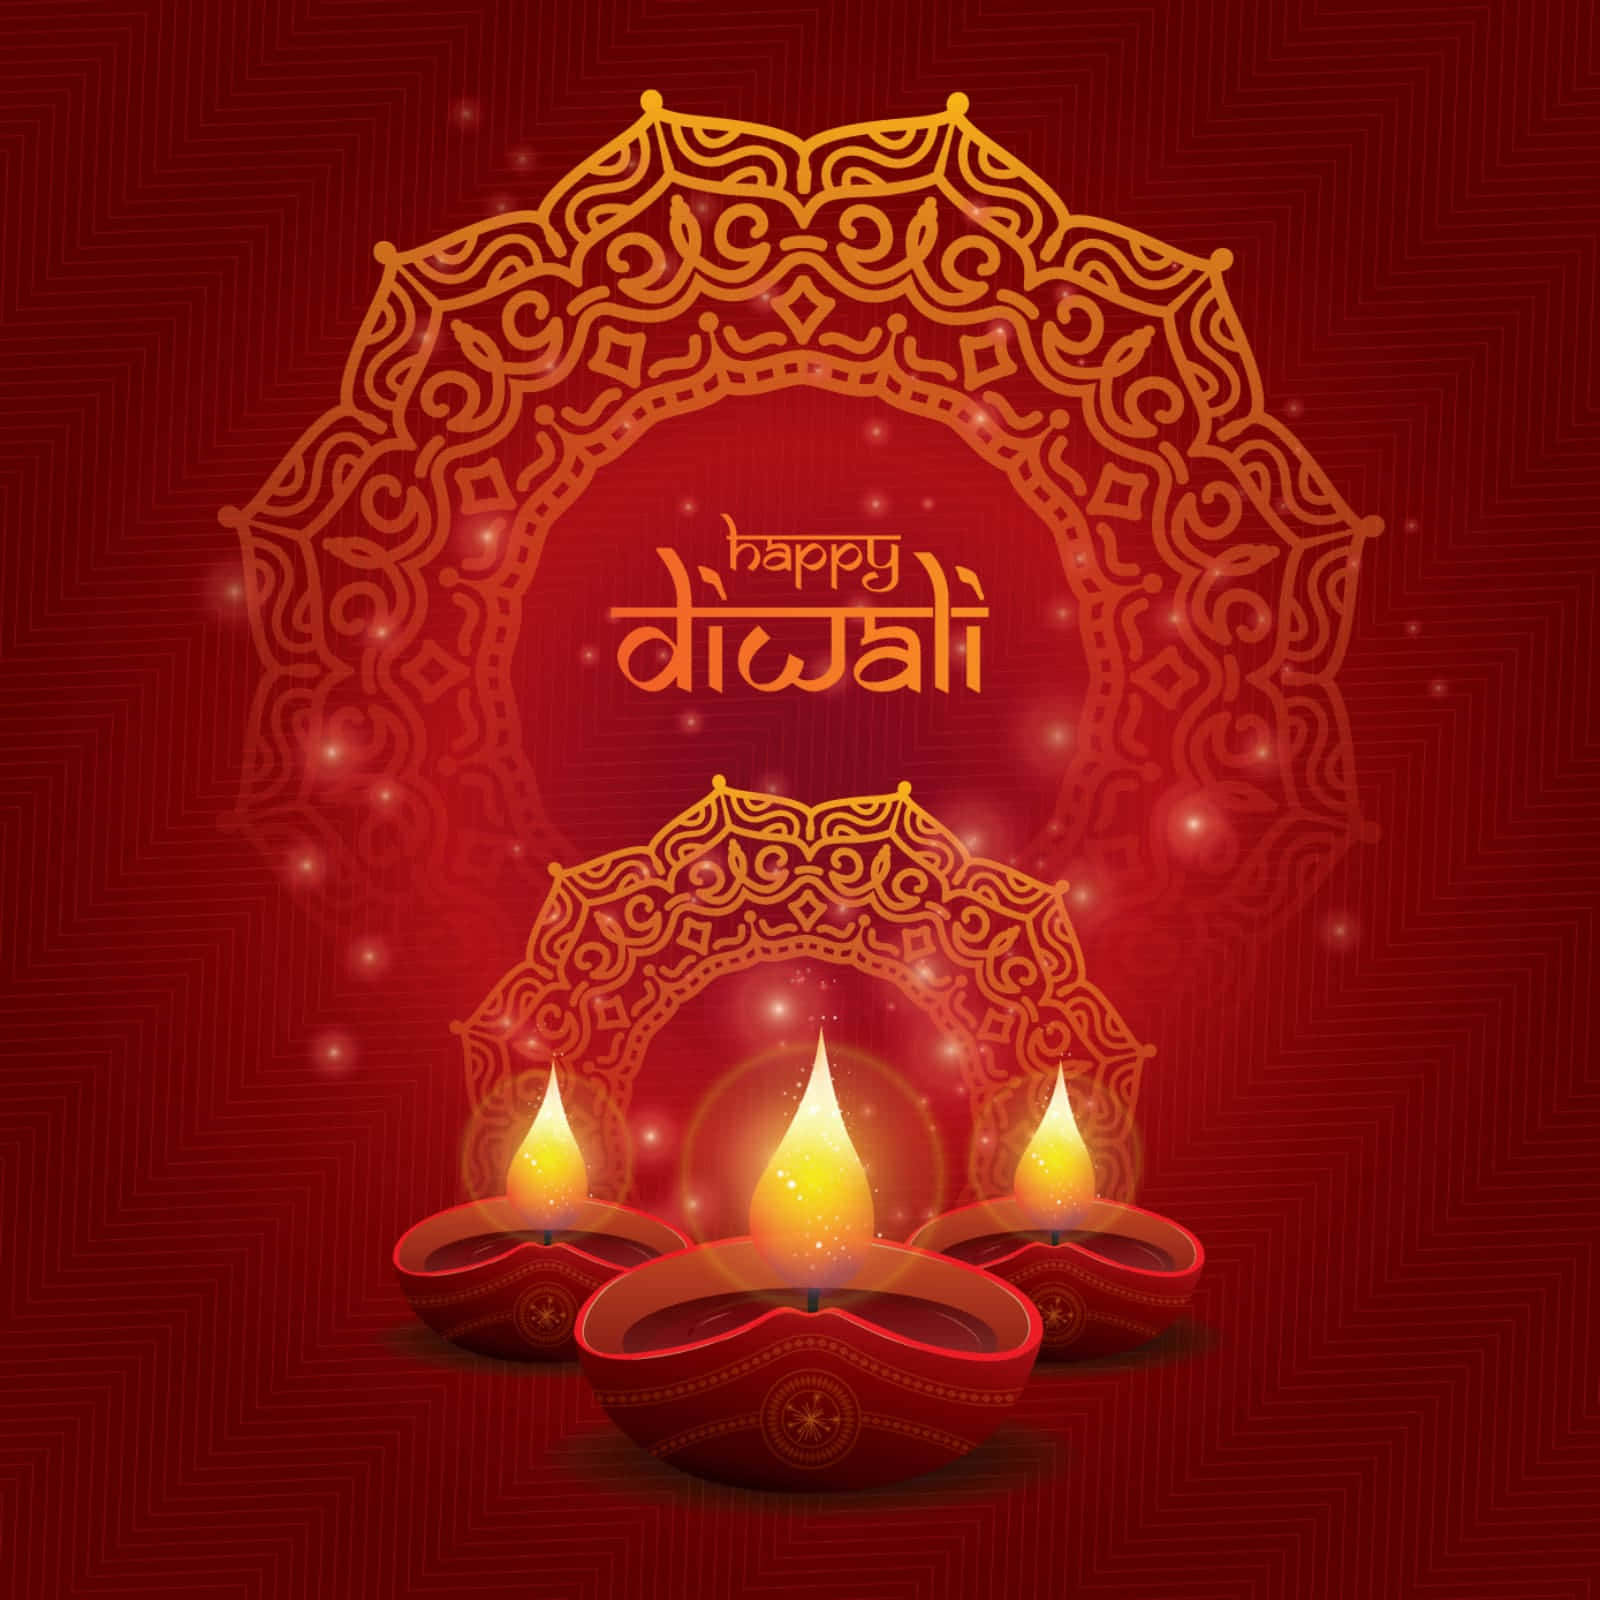 Happy Diwali With A Red Background With Candles